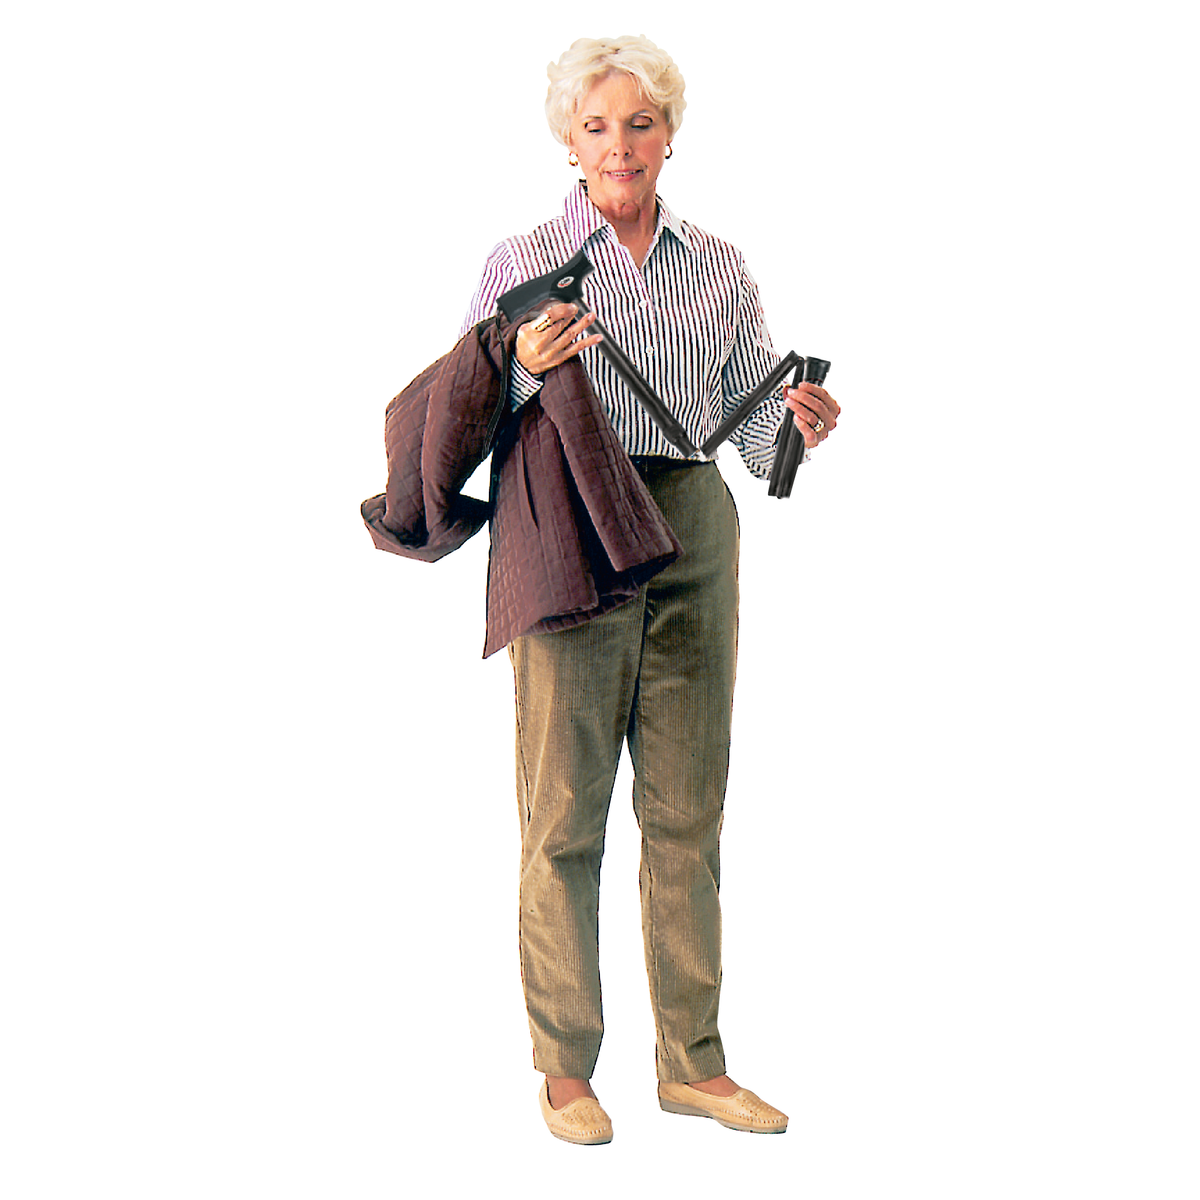 An elderly woman holding the Carex Soft Grip Folding Can with Derby Handle on a white background